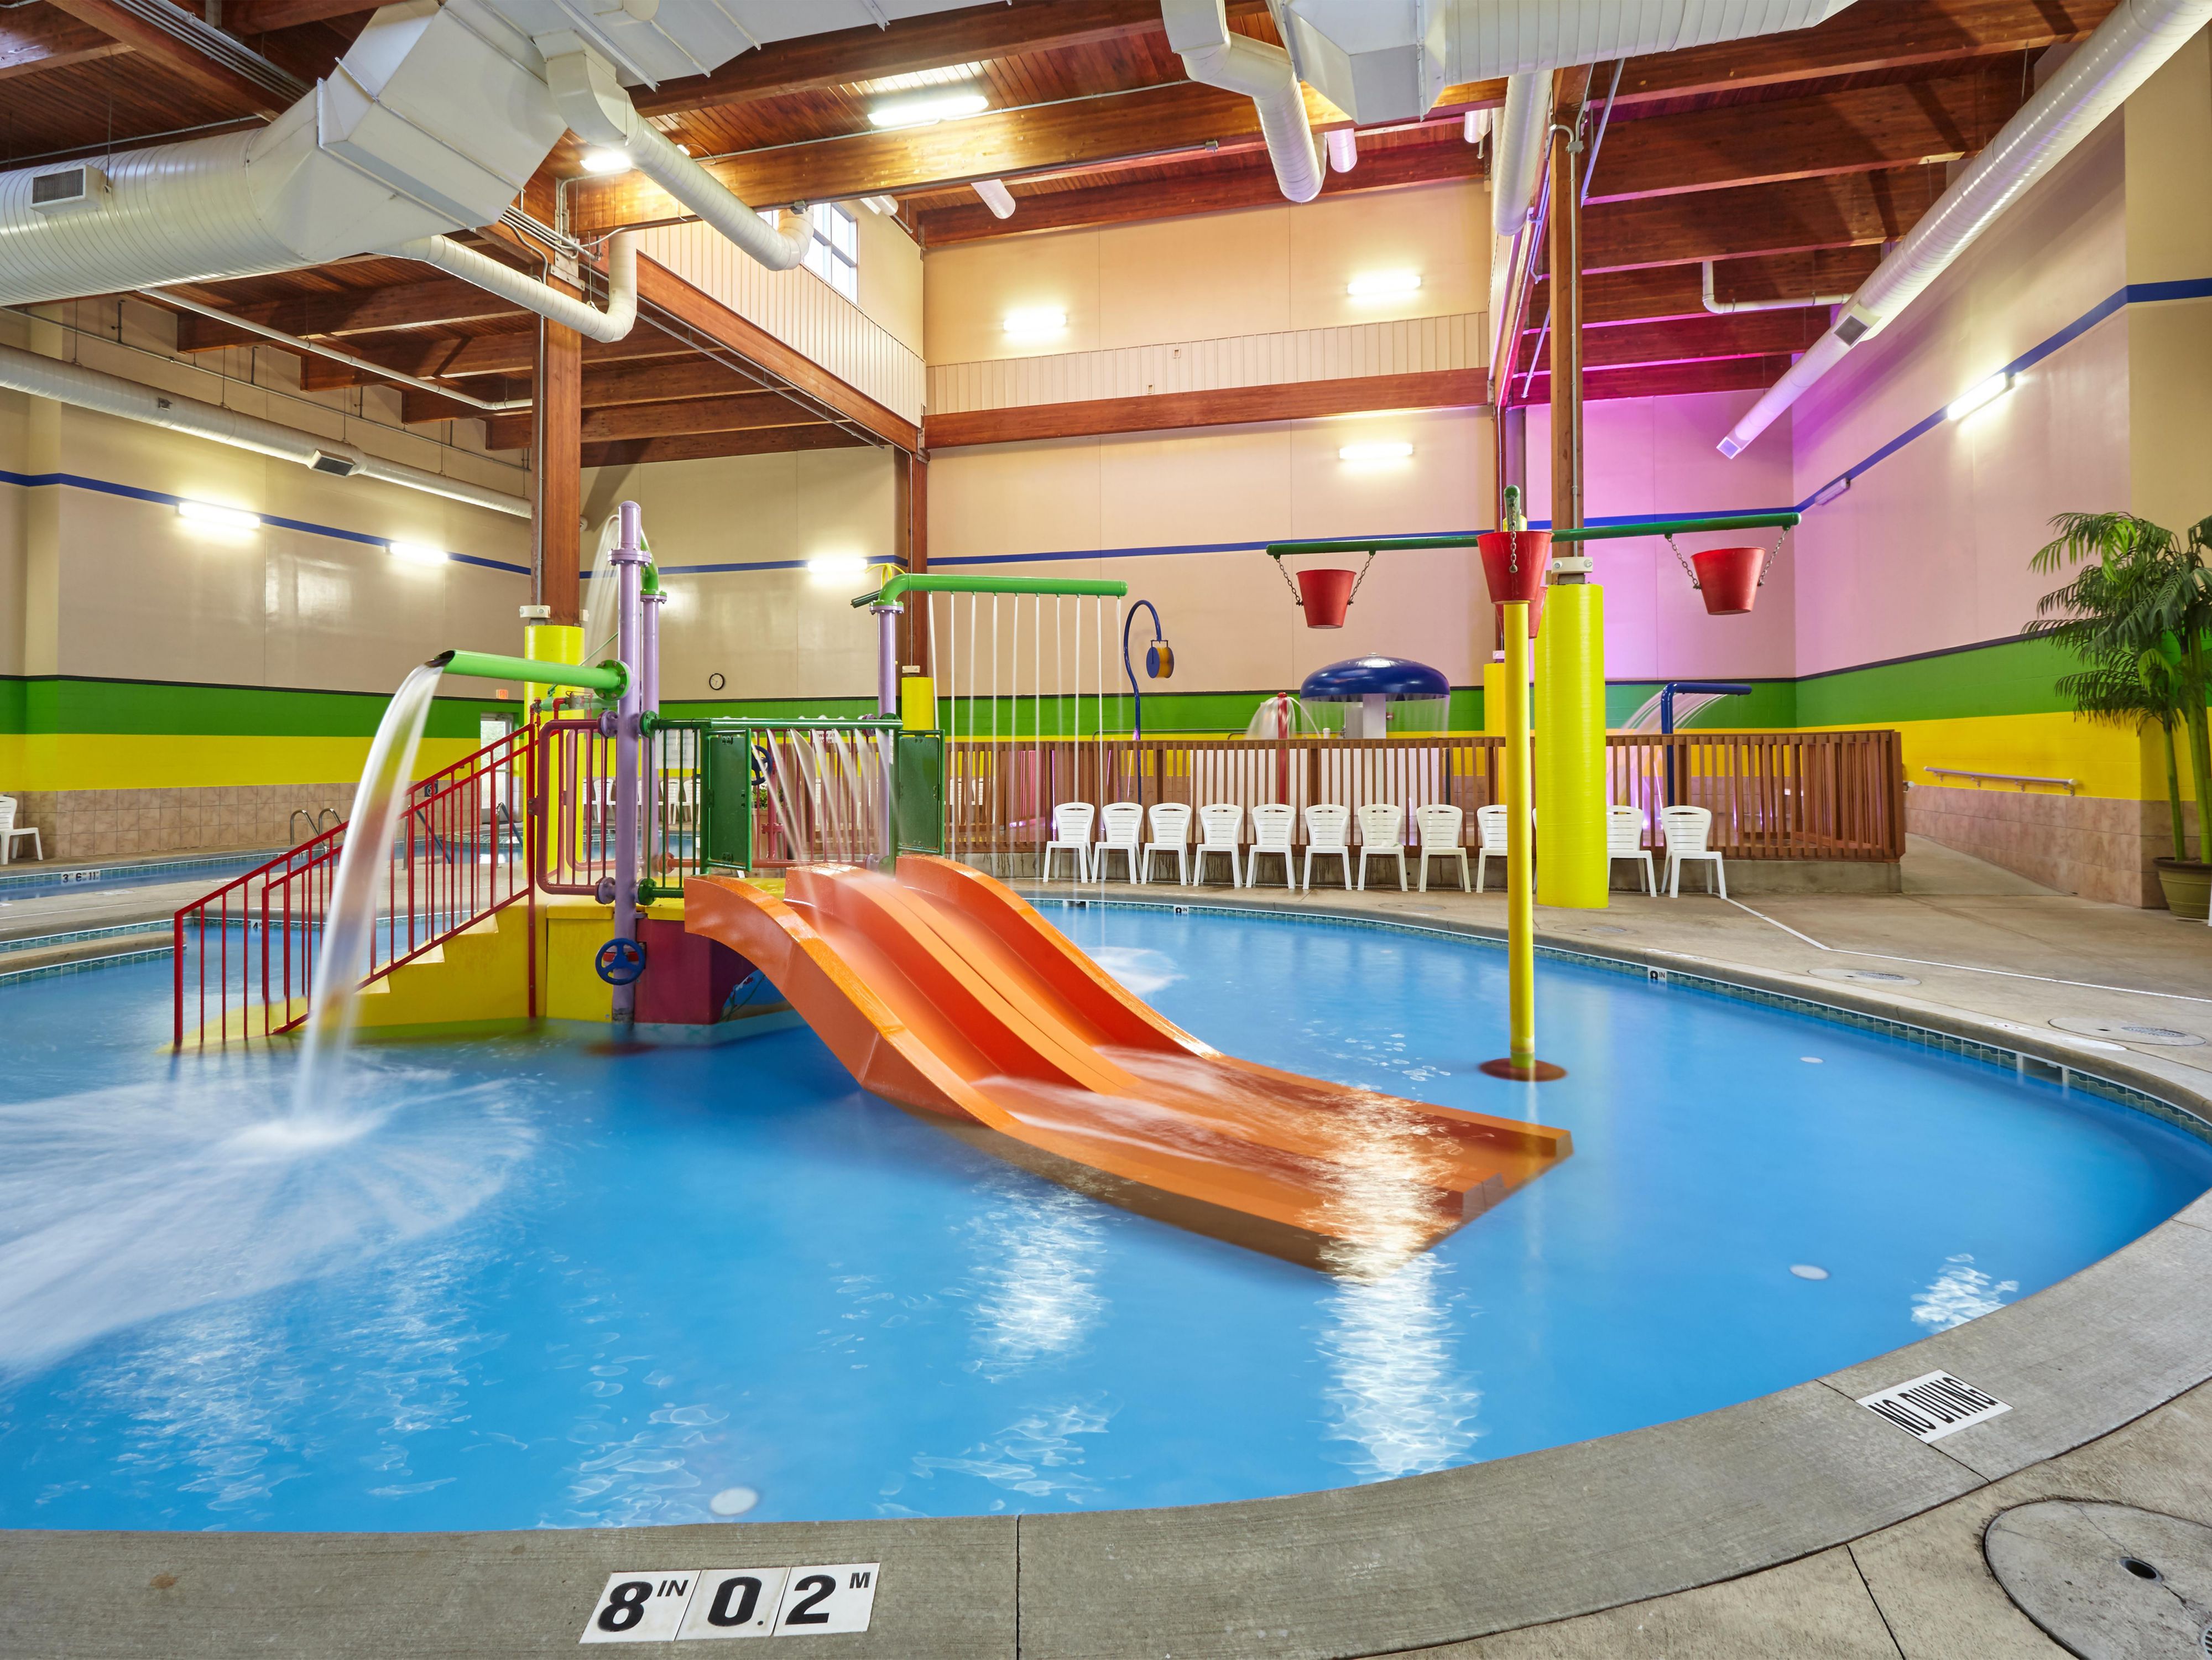 Stay and play at the hotels little dip indoor splash pad! Perfect for small children. Pool area has a maximum 4 foot depth and an adult hot tub.